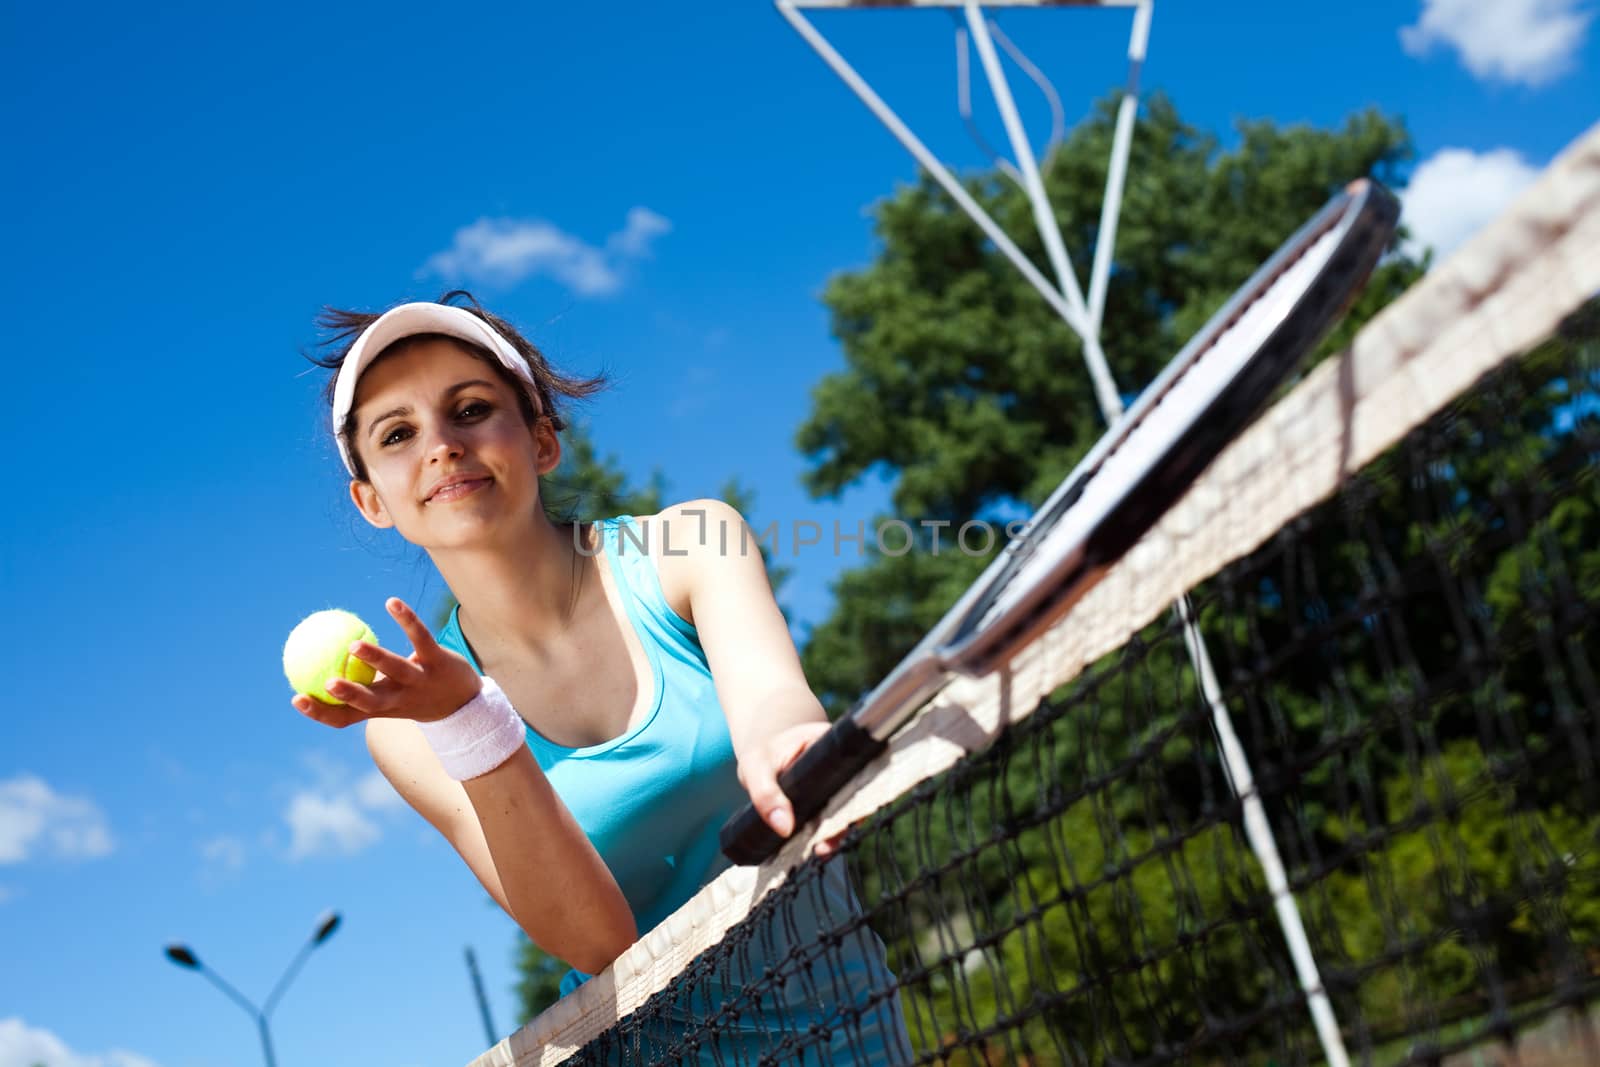 Woman playing tennis, summertime saturated theme